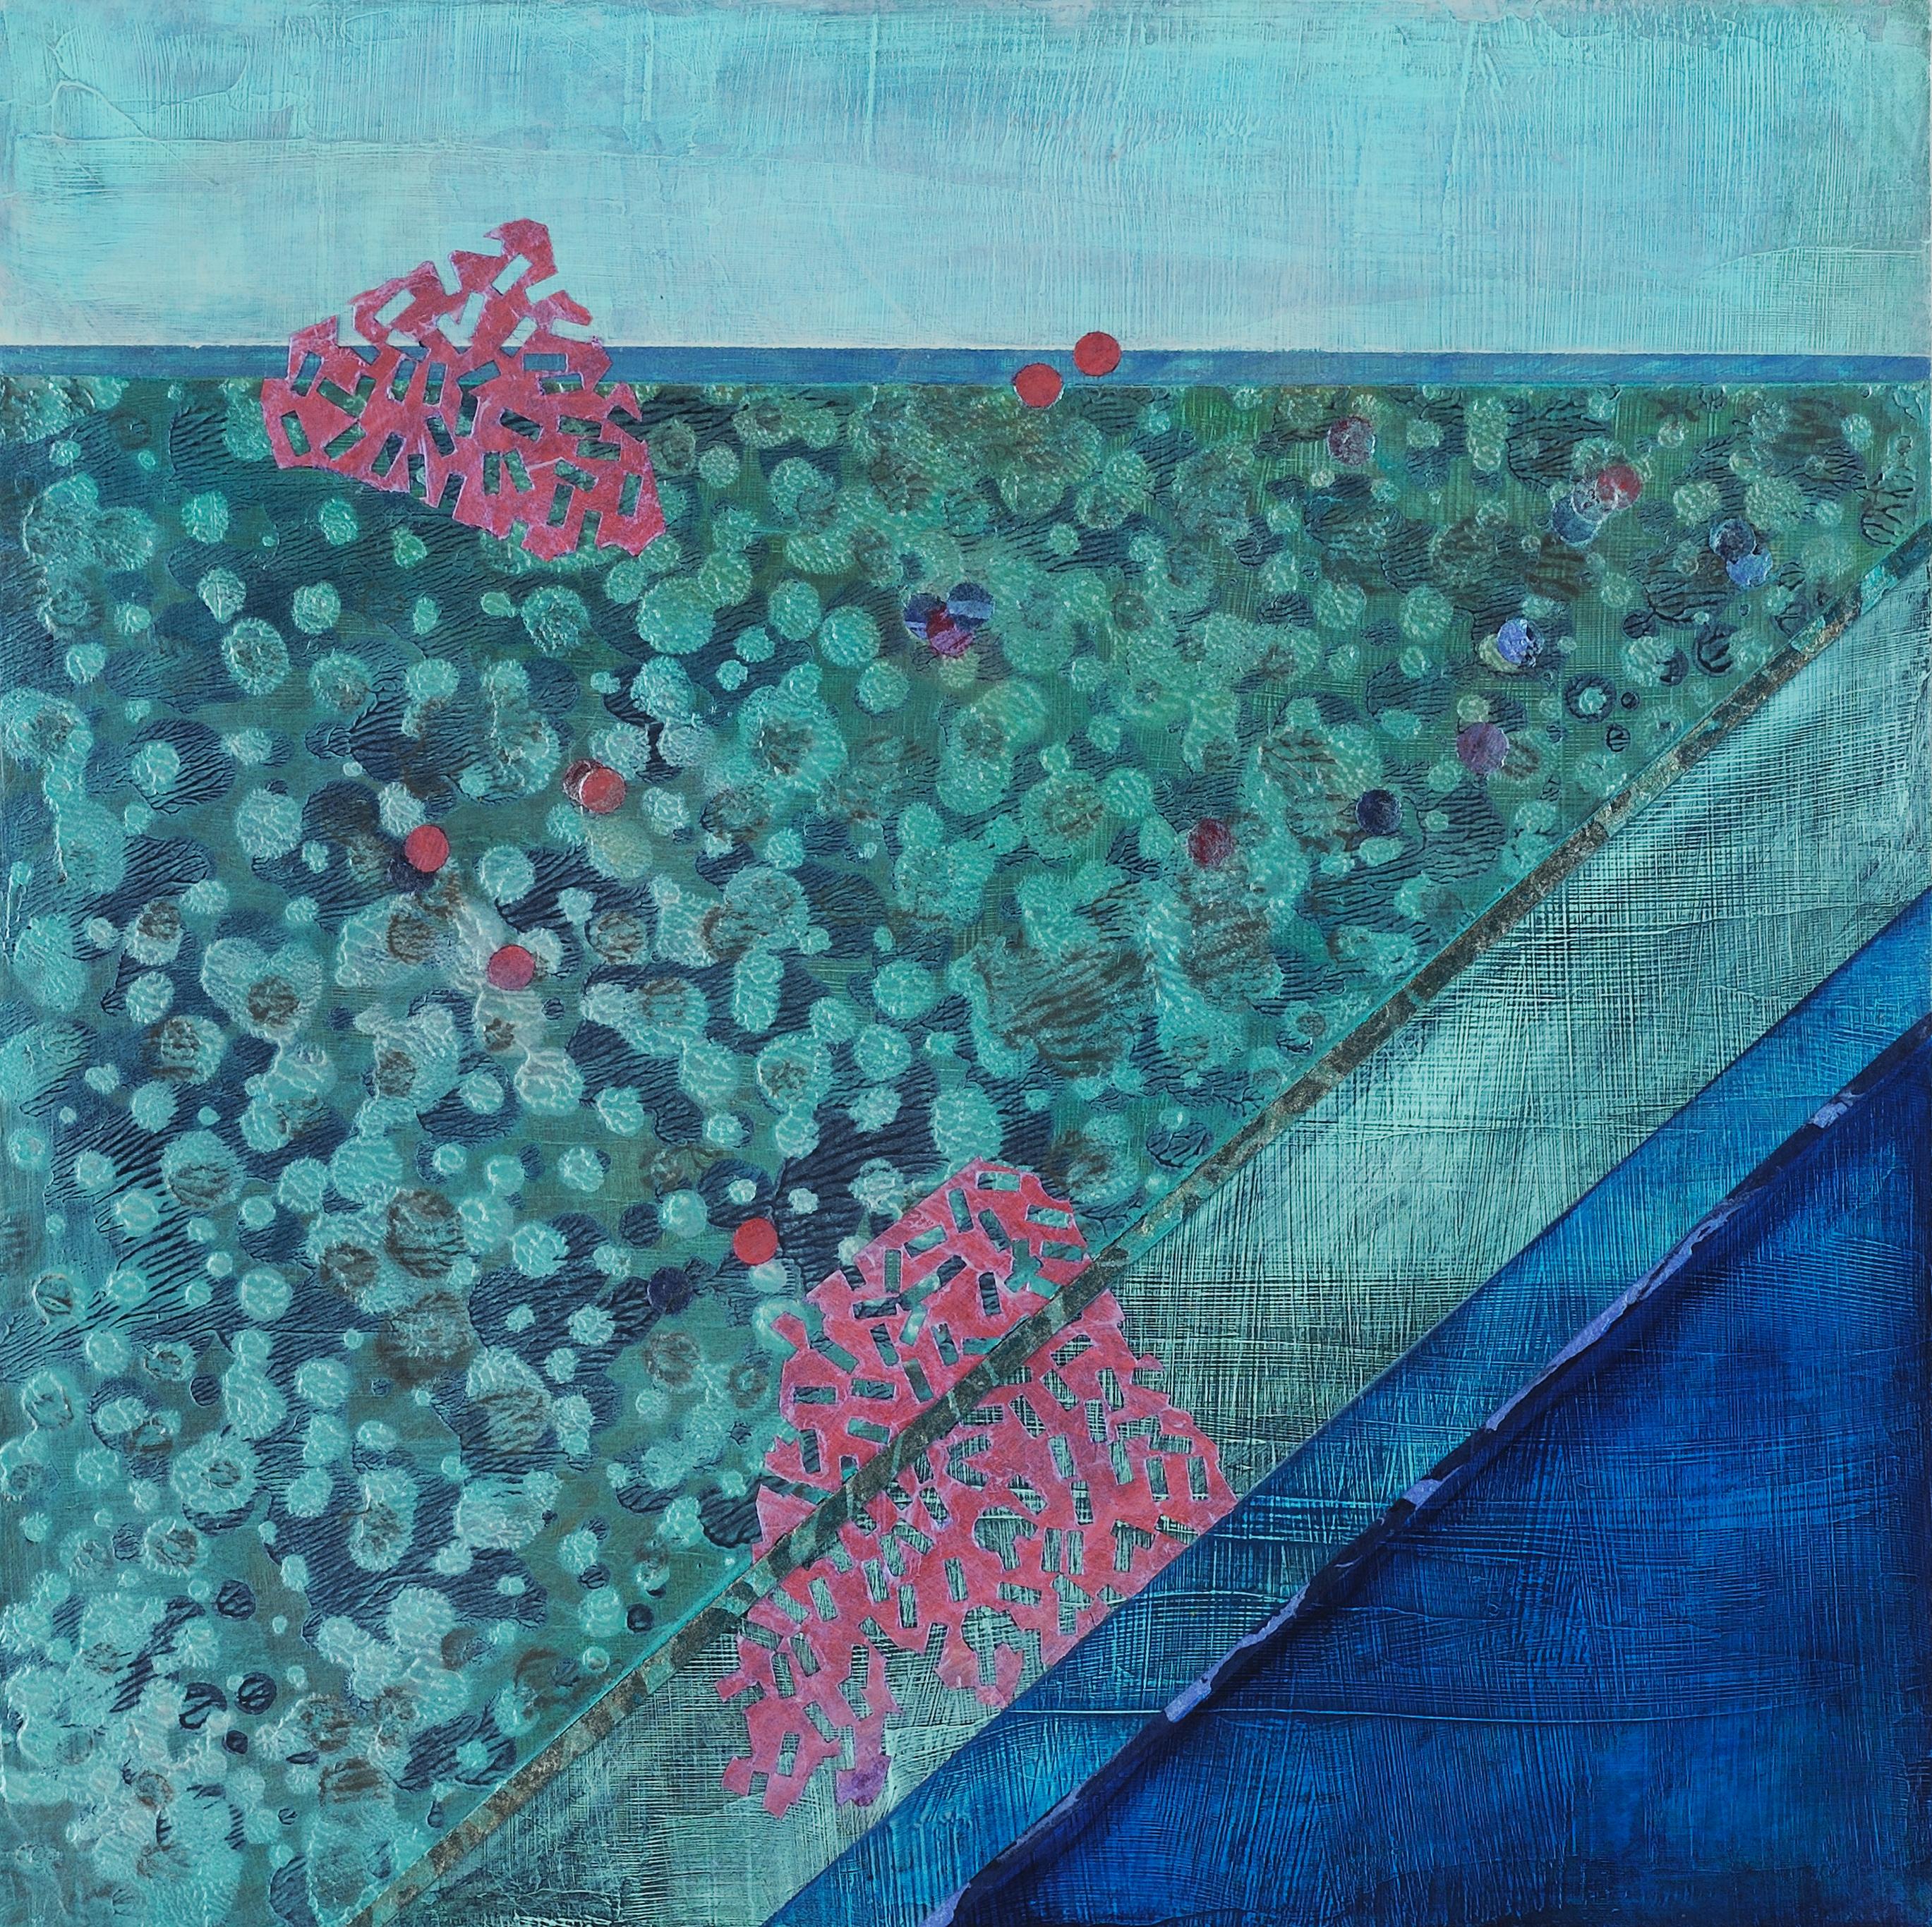 Lisa Hill Abstract Painting - Crossing Lines, Intersections #7, blue and green mixed media painting